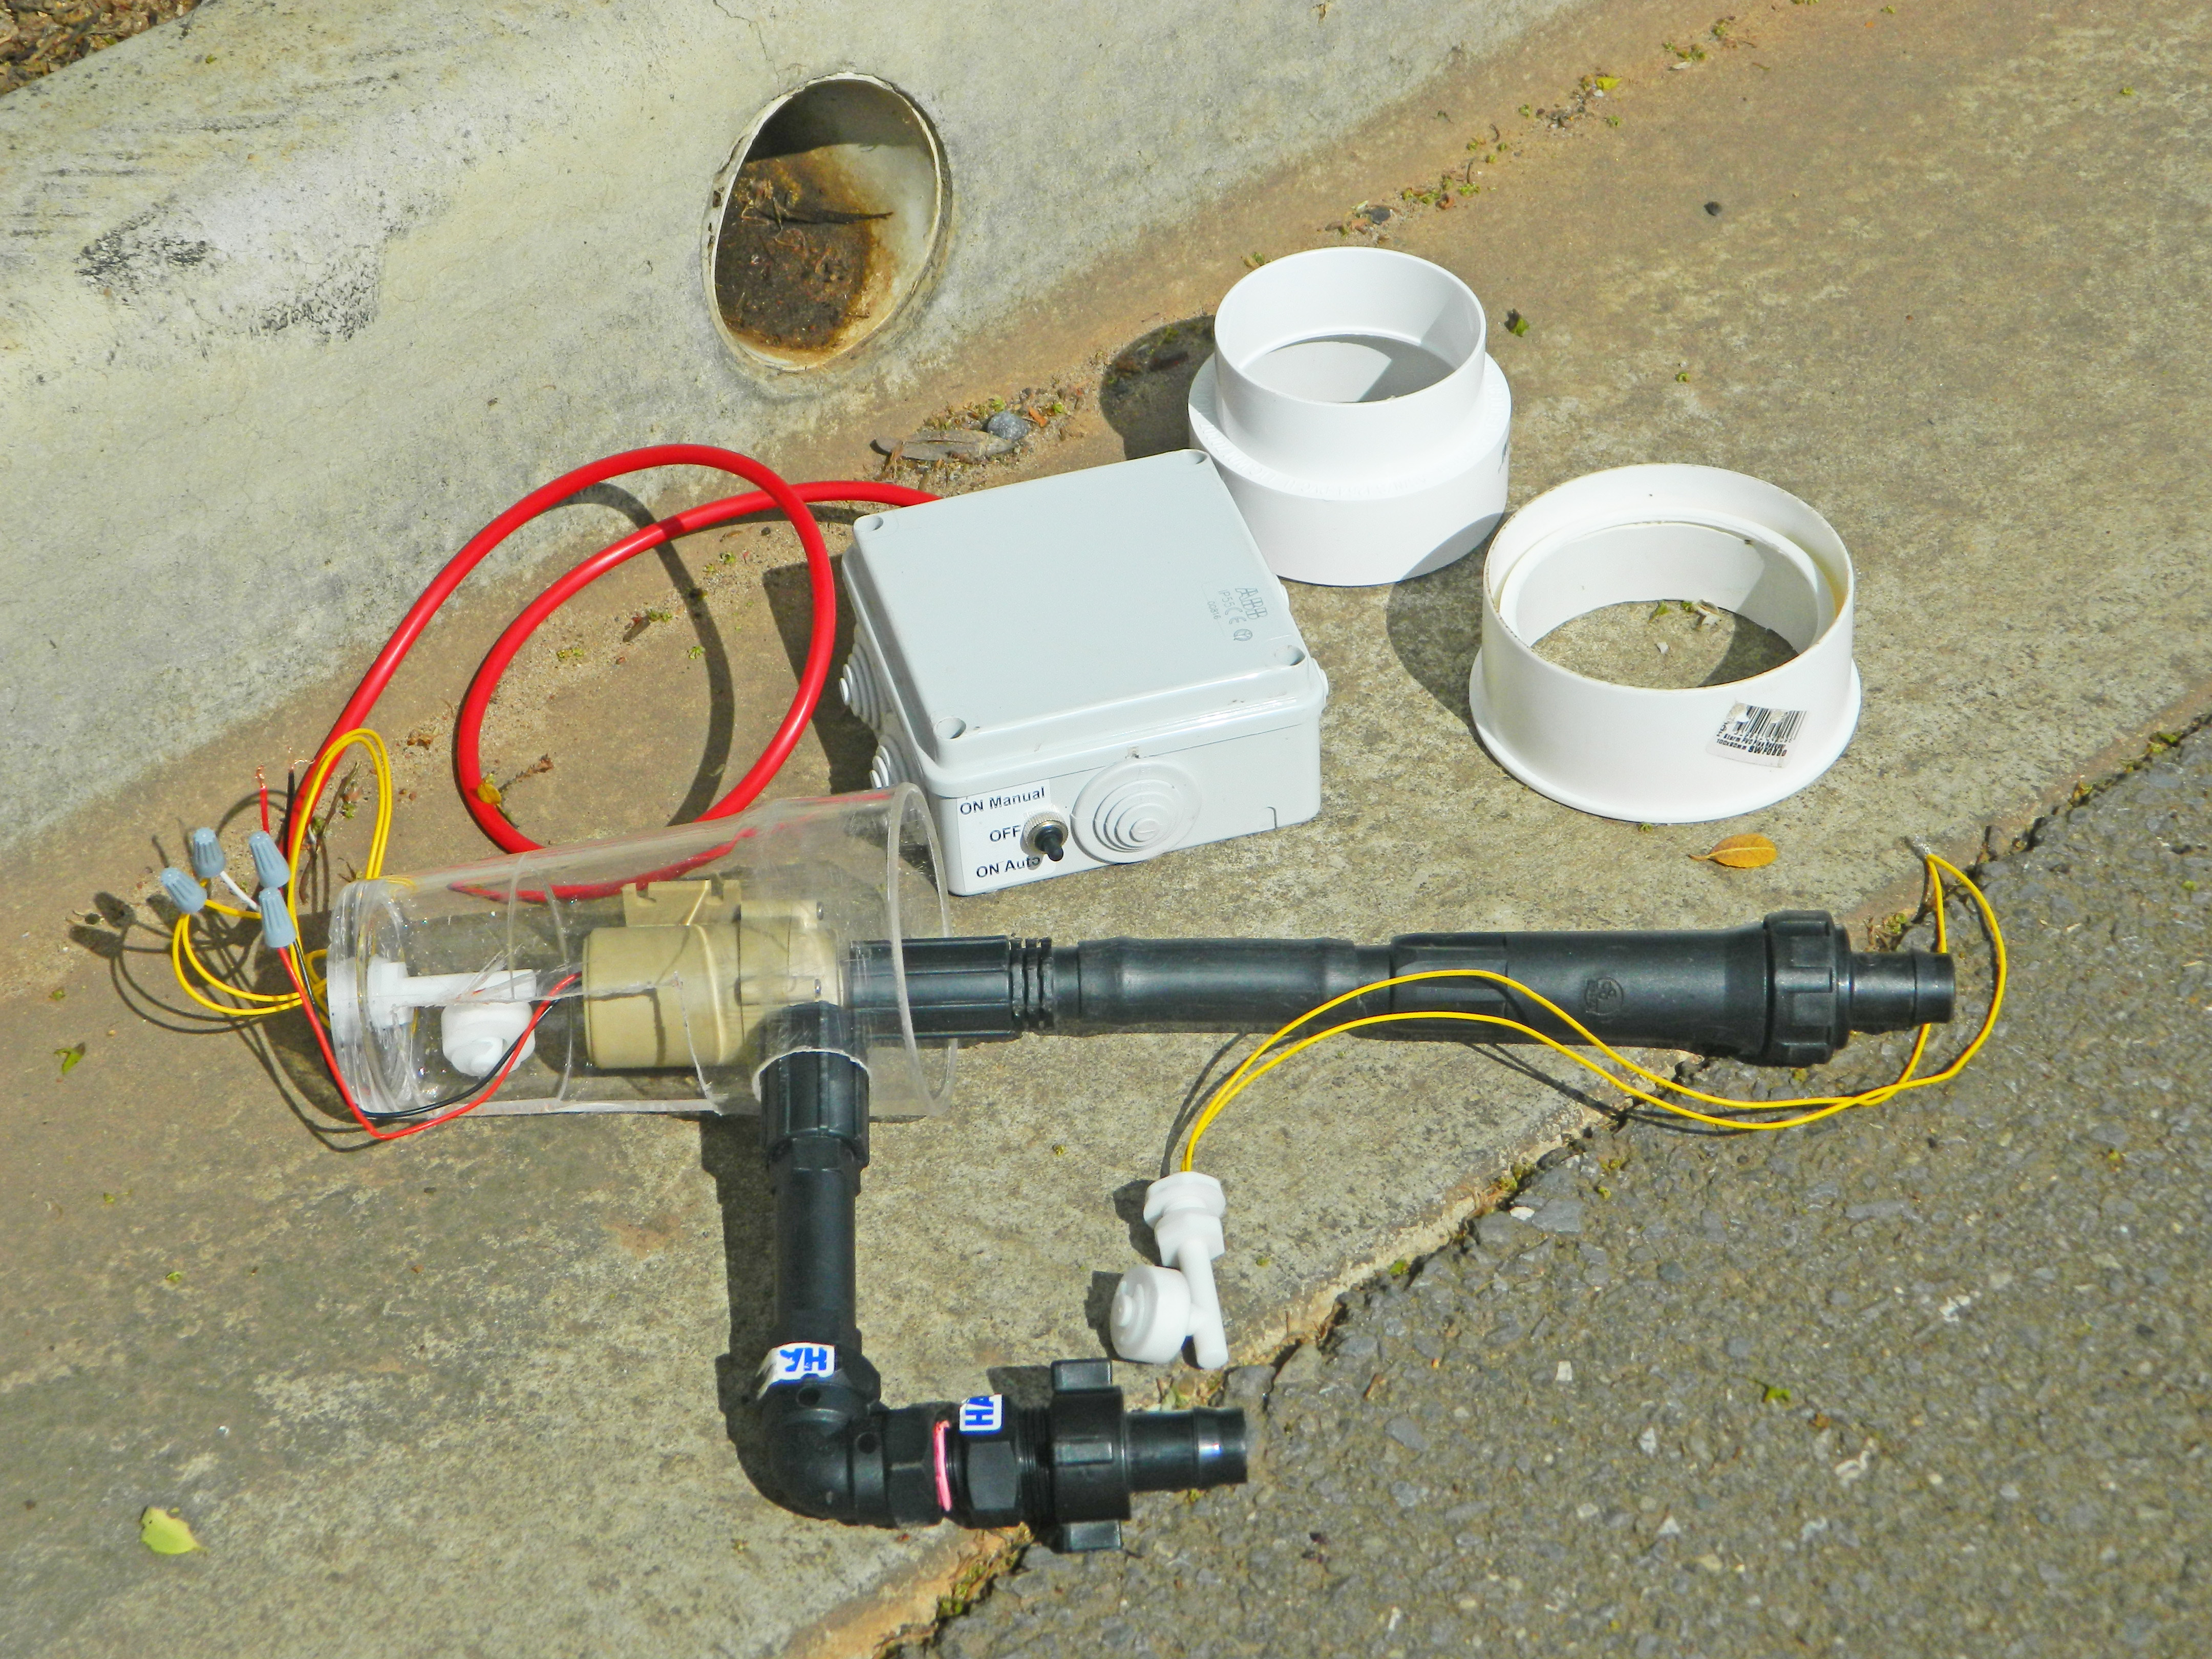 DIY Kerbside Stormwater Recycling Kit.My latest invention allows you to transfer stormwater from roadside gutters into your rainwater tank. The ...